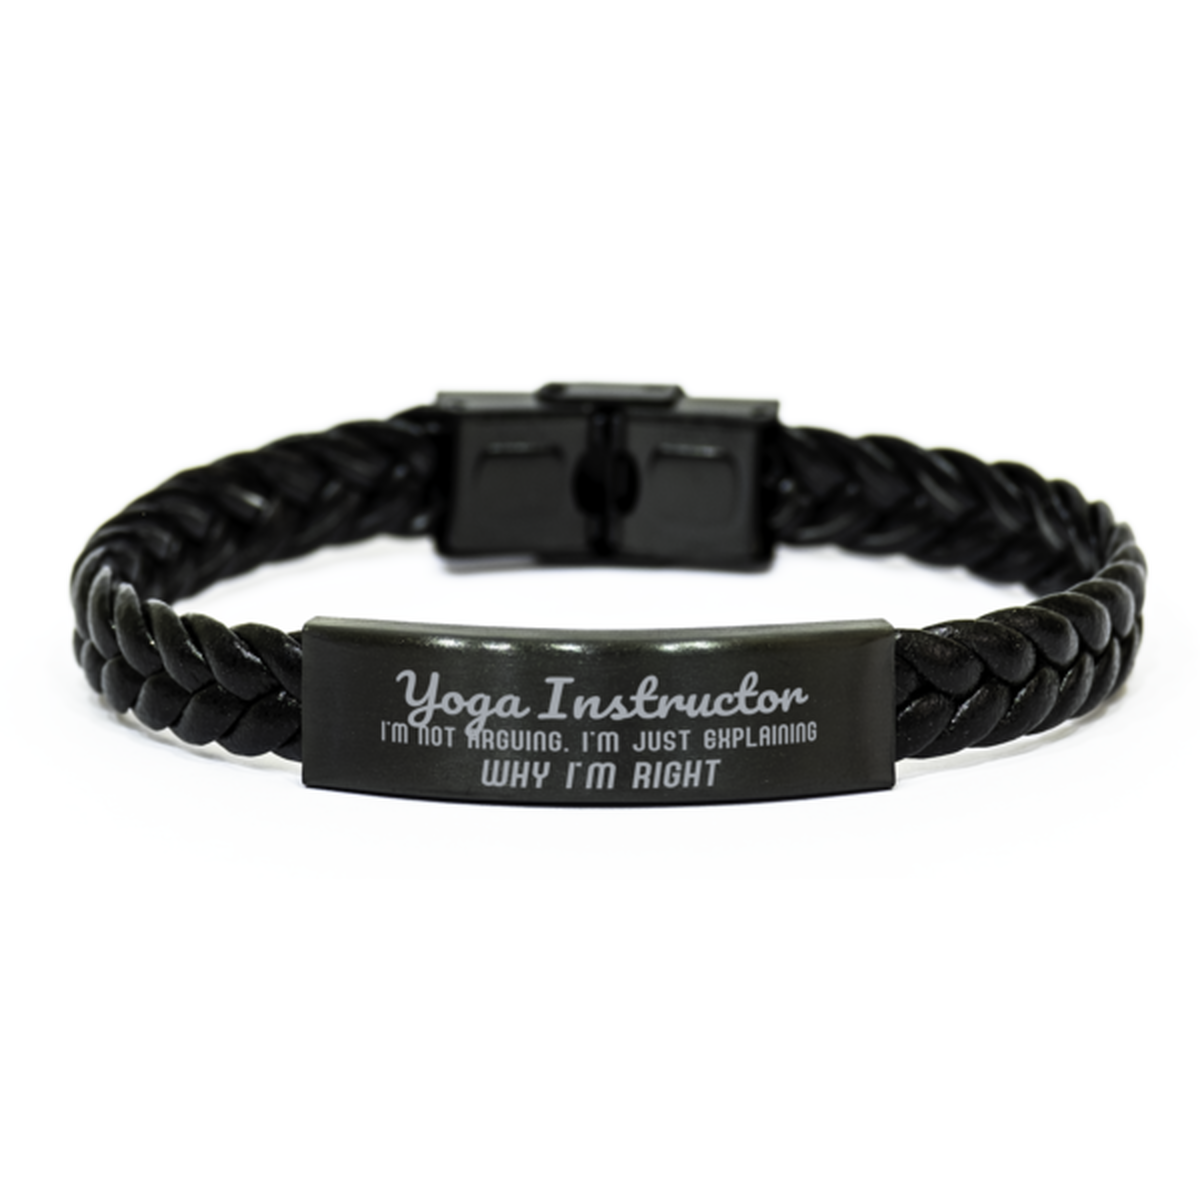 Yoga Instructor I'm not Arguing. I'm Just Explaining Why I'm RIGHT Braided Leather Bracelet, Graduation Birthday Christmas Yoga Instructor Gifts For Yoga Instructor Funny Saying Quote Present for Men Women Coworker